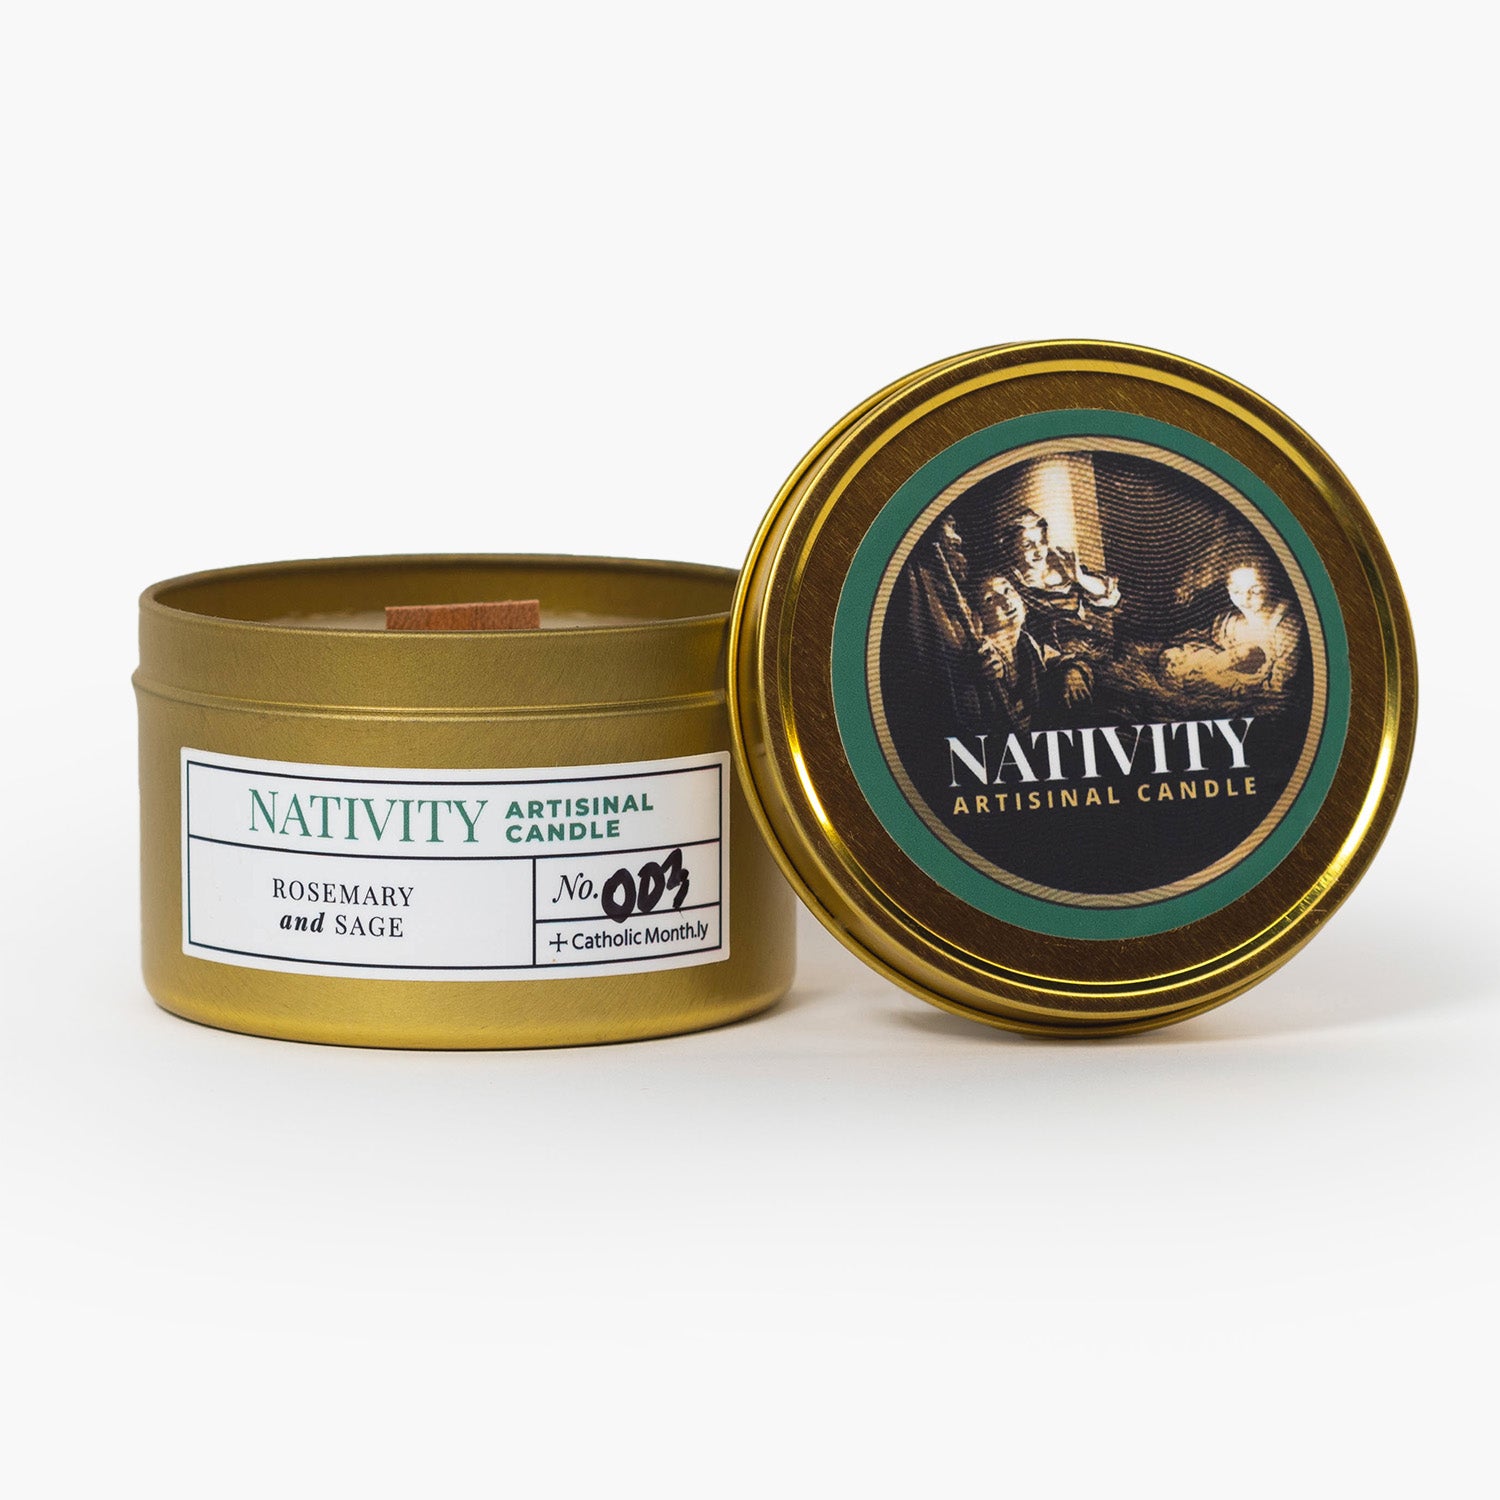 Nativity Beeswax Candle